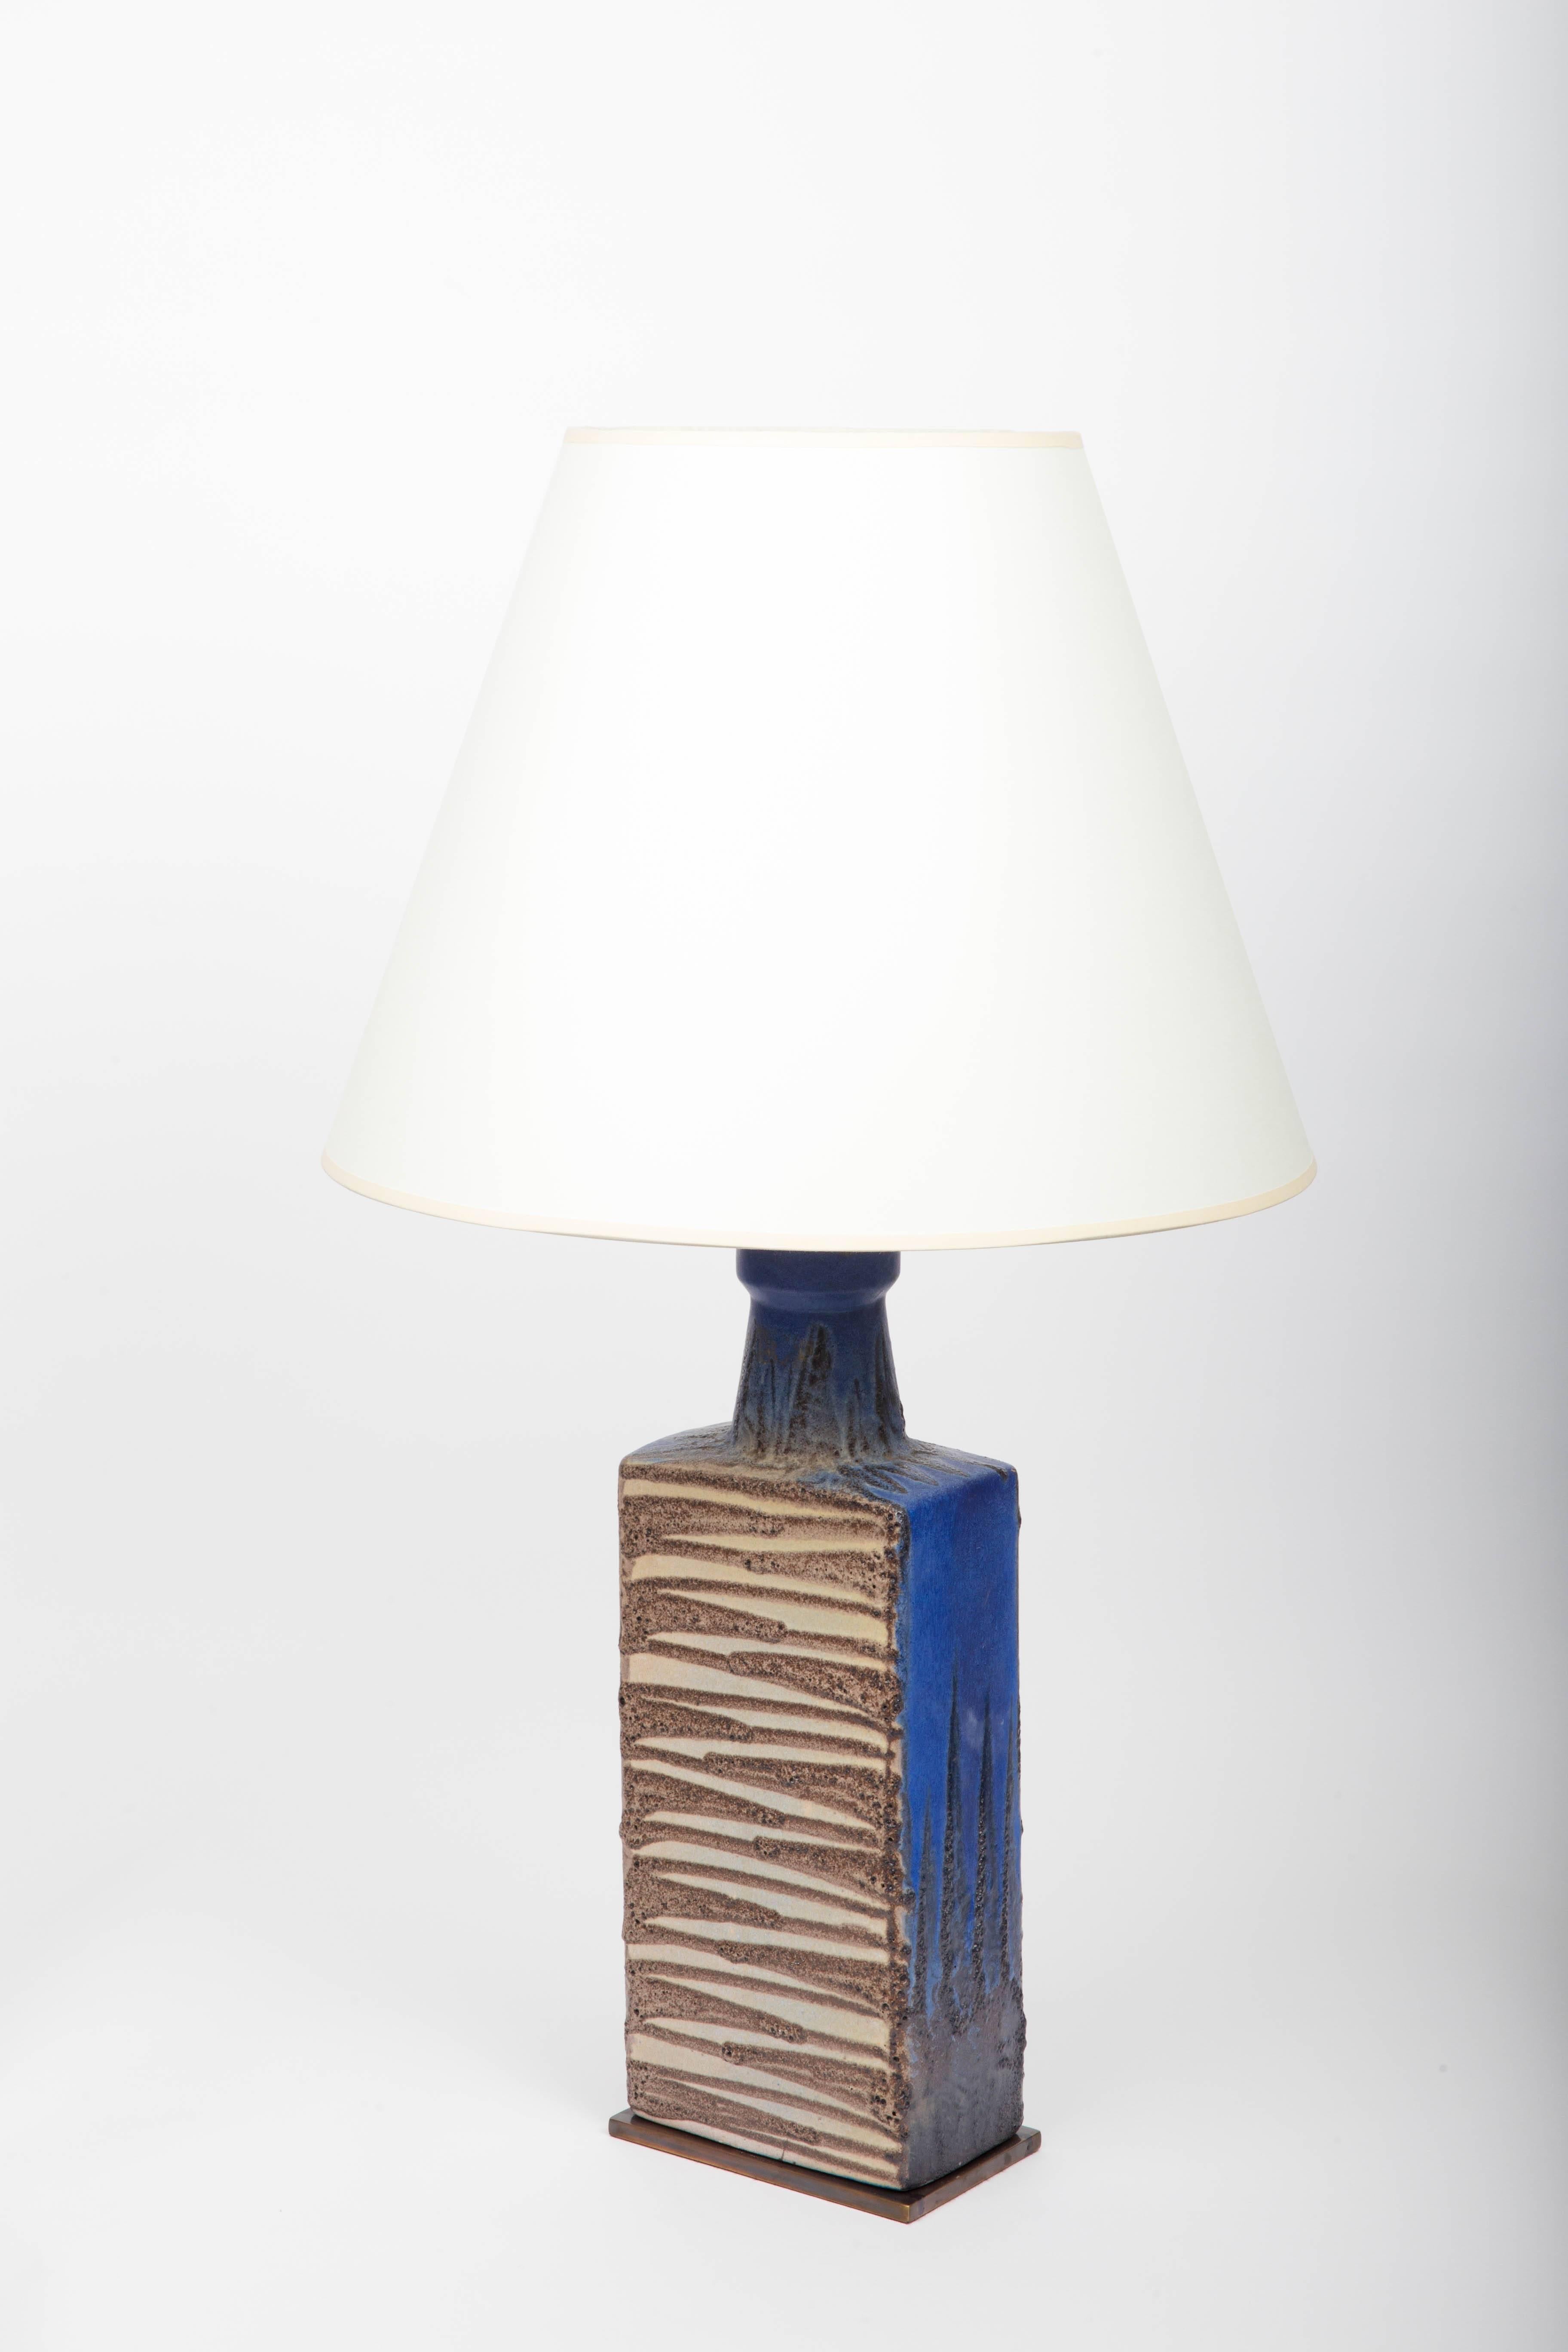 Modernist Blue and Brown Ceramic Vase, Converted into Lamp 3